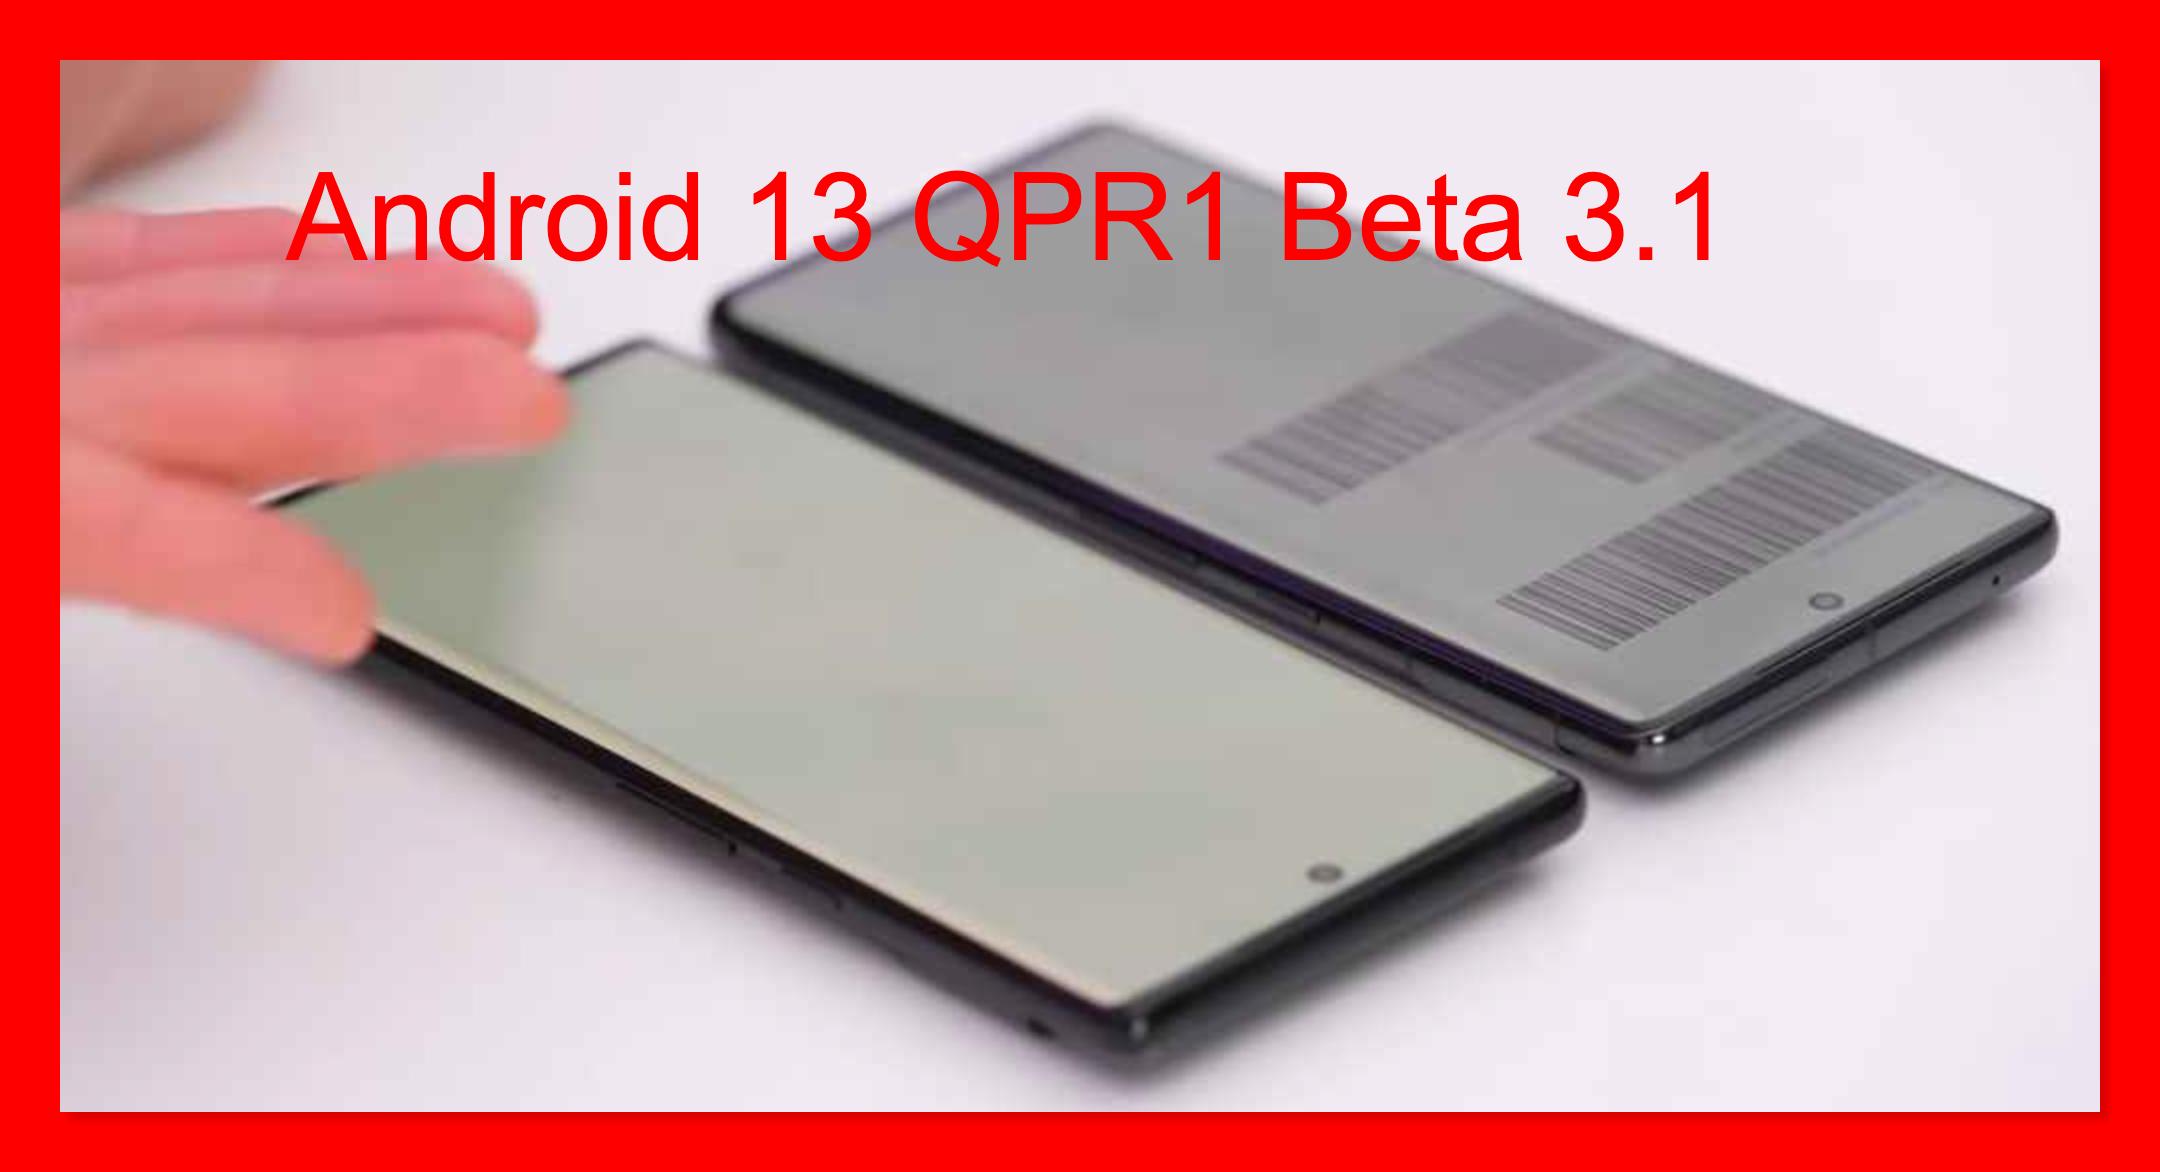 Android 13 QPR1 Beta 3.1